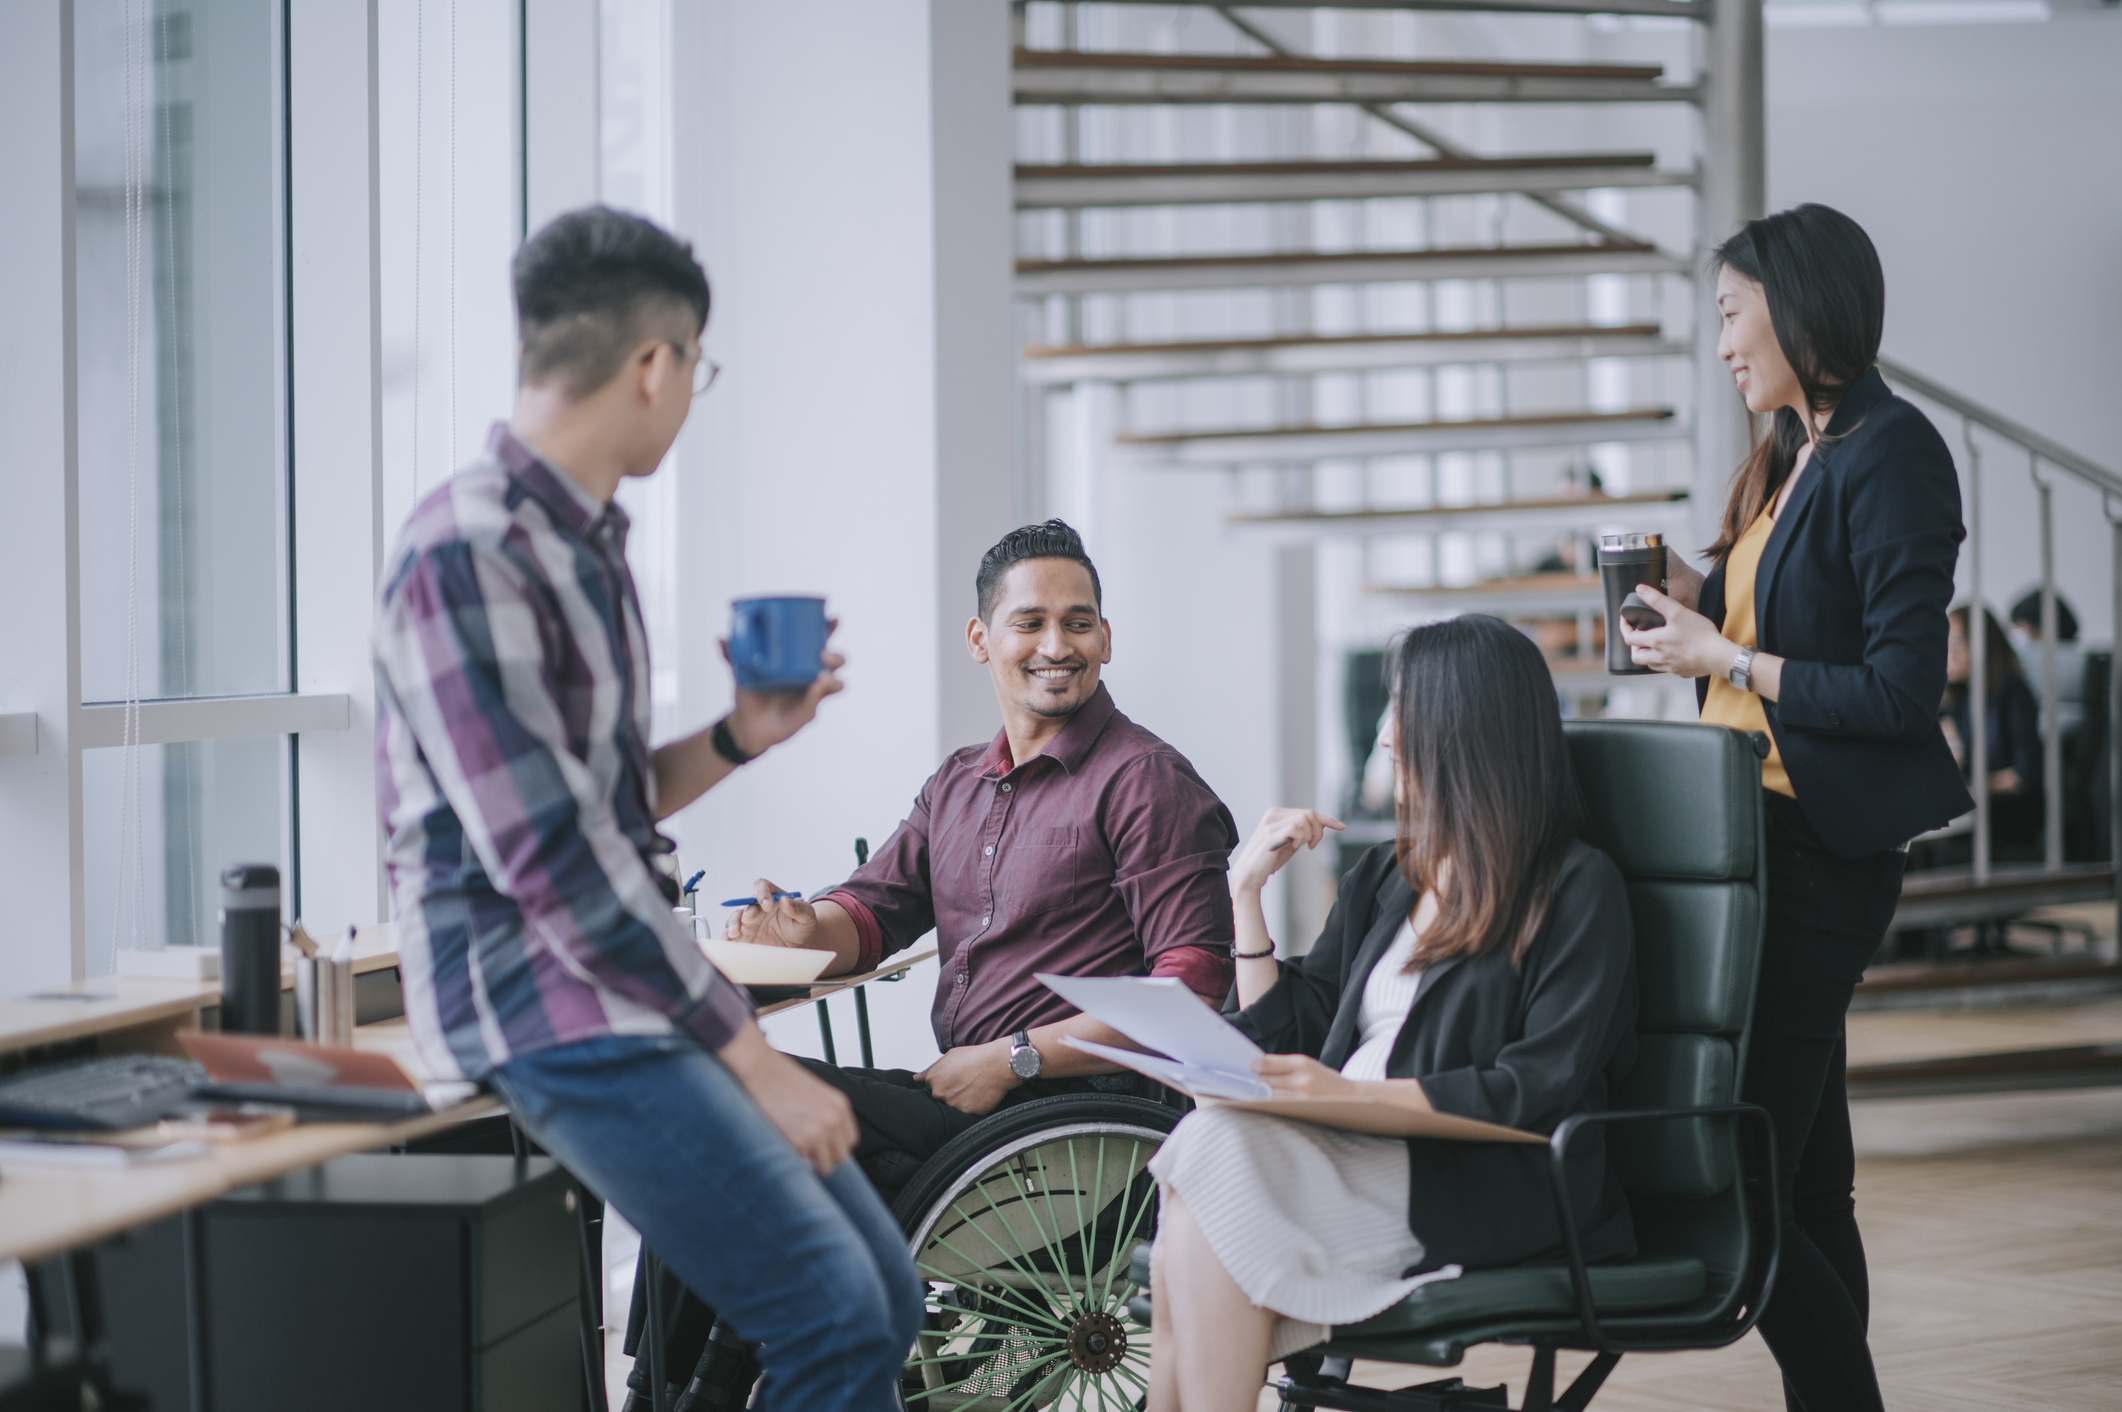 5 steps to creating a positive workplace culture